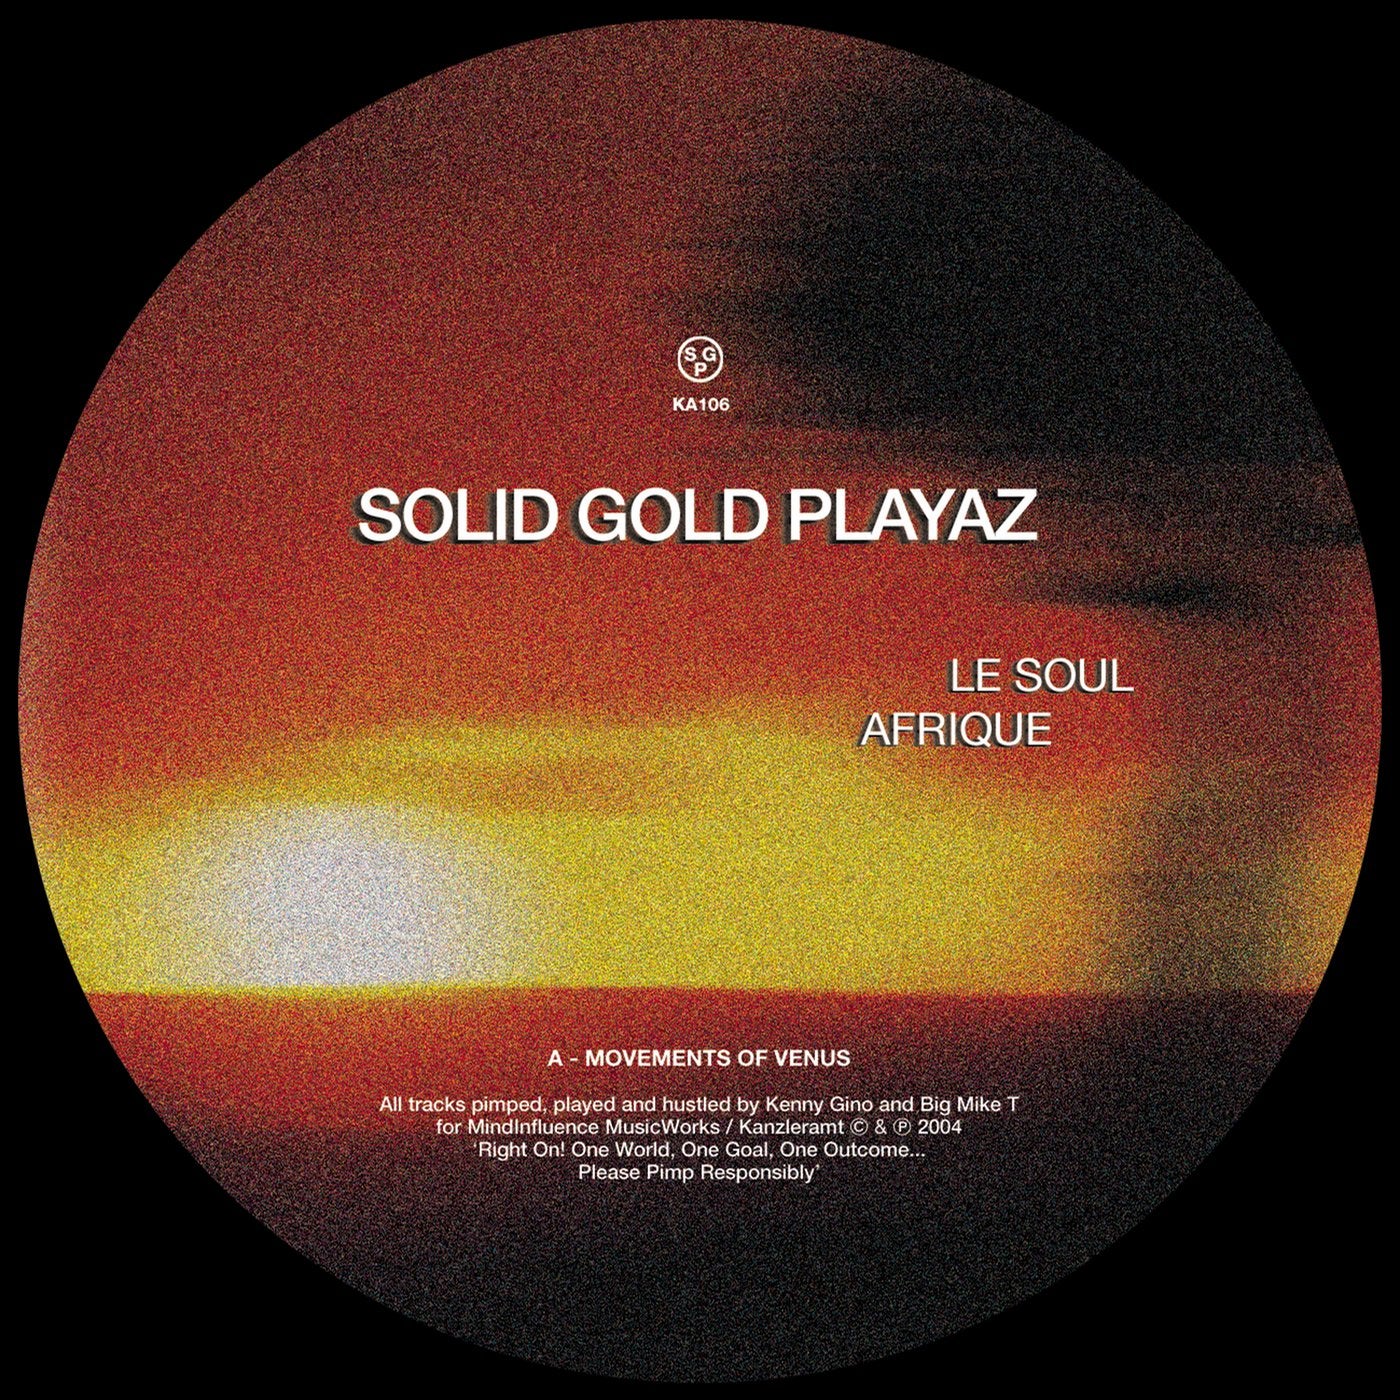 Solid Gold Playaz, Kenny Gino, Big Mike T - Le Soul Afrique [881390330669]